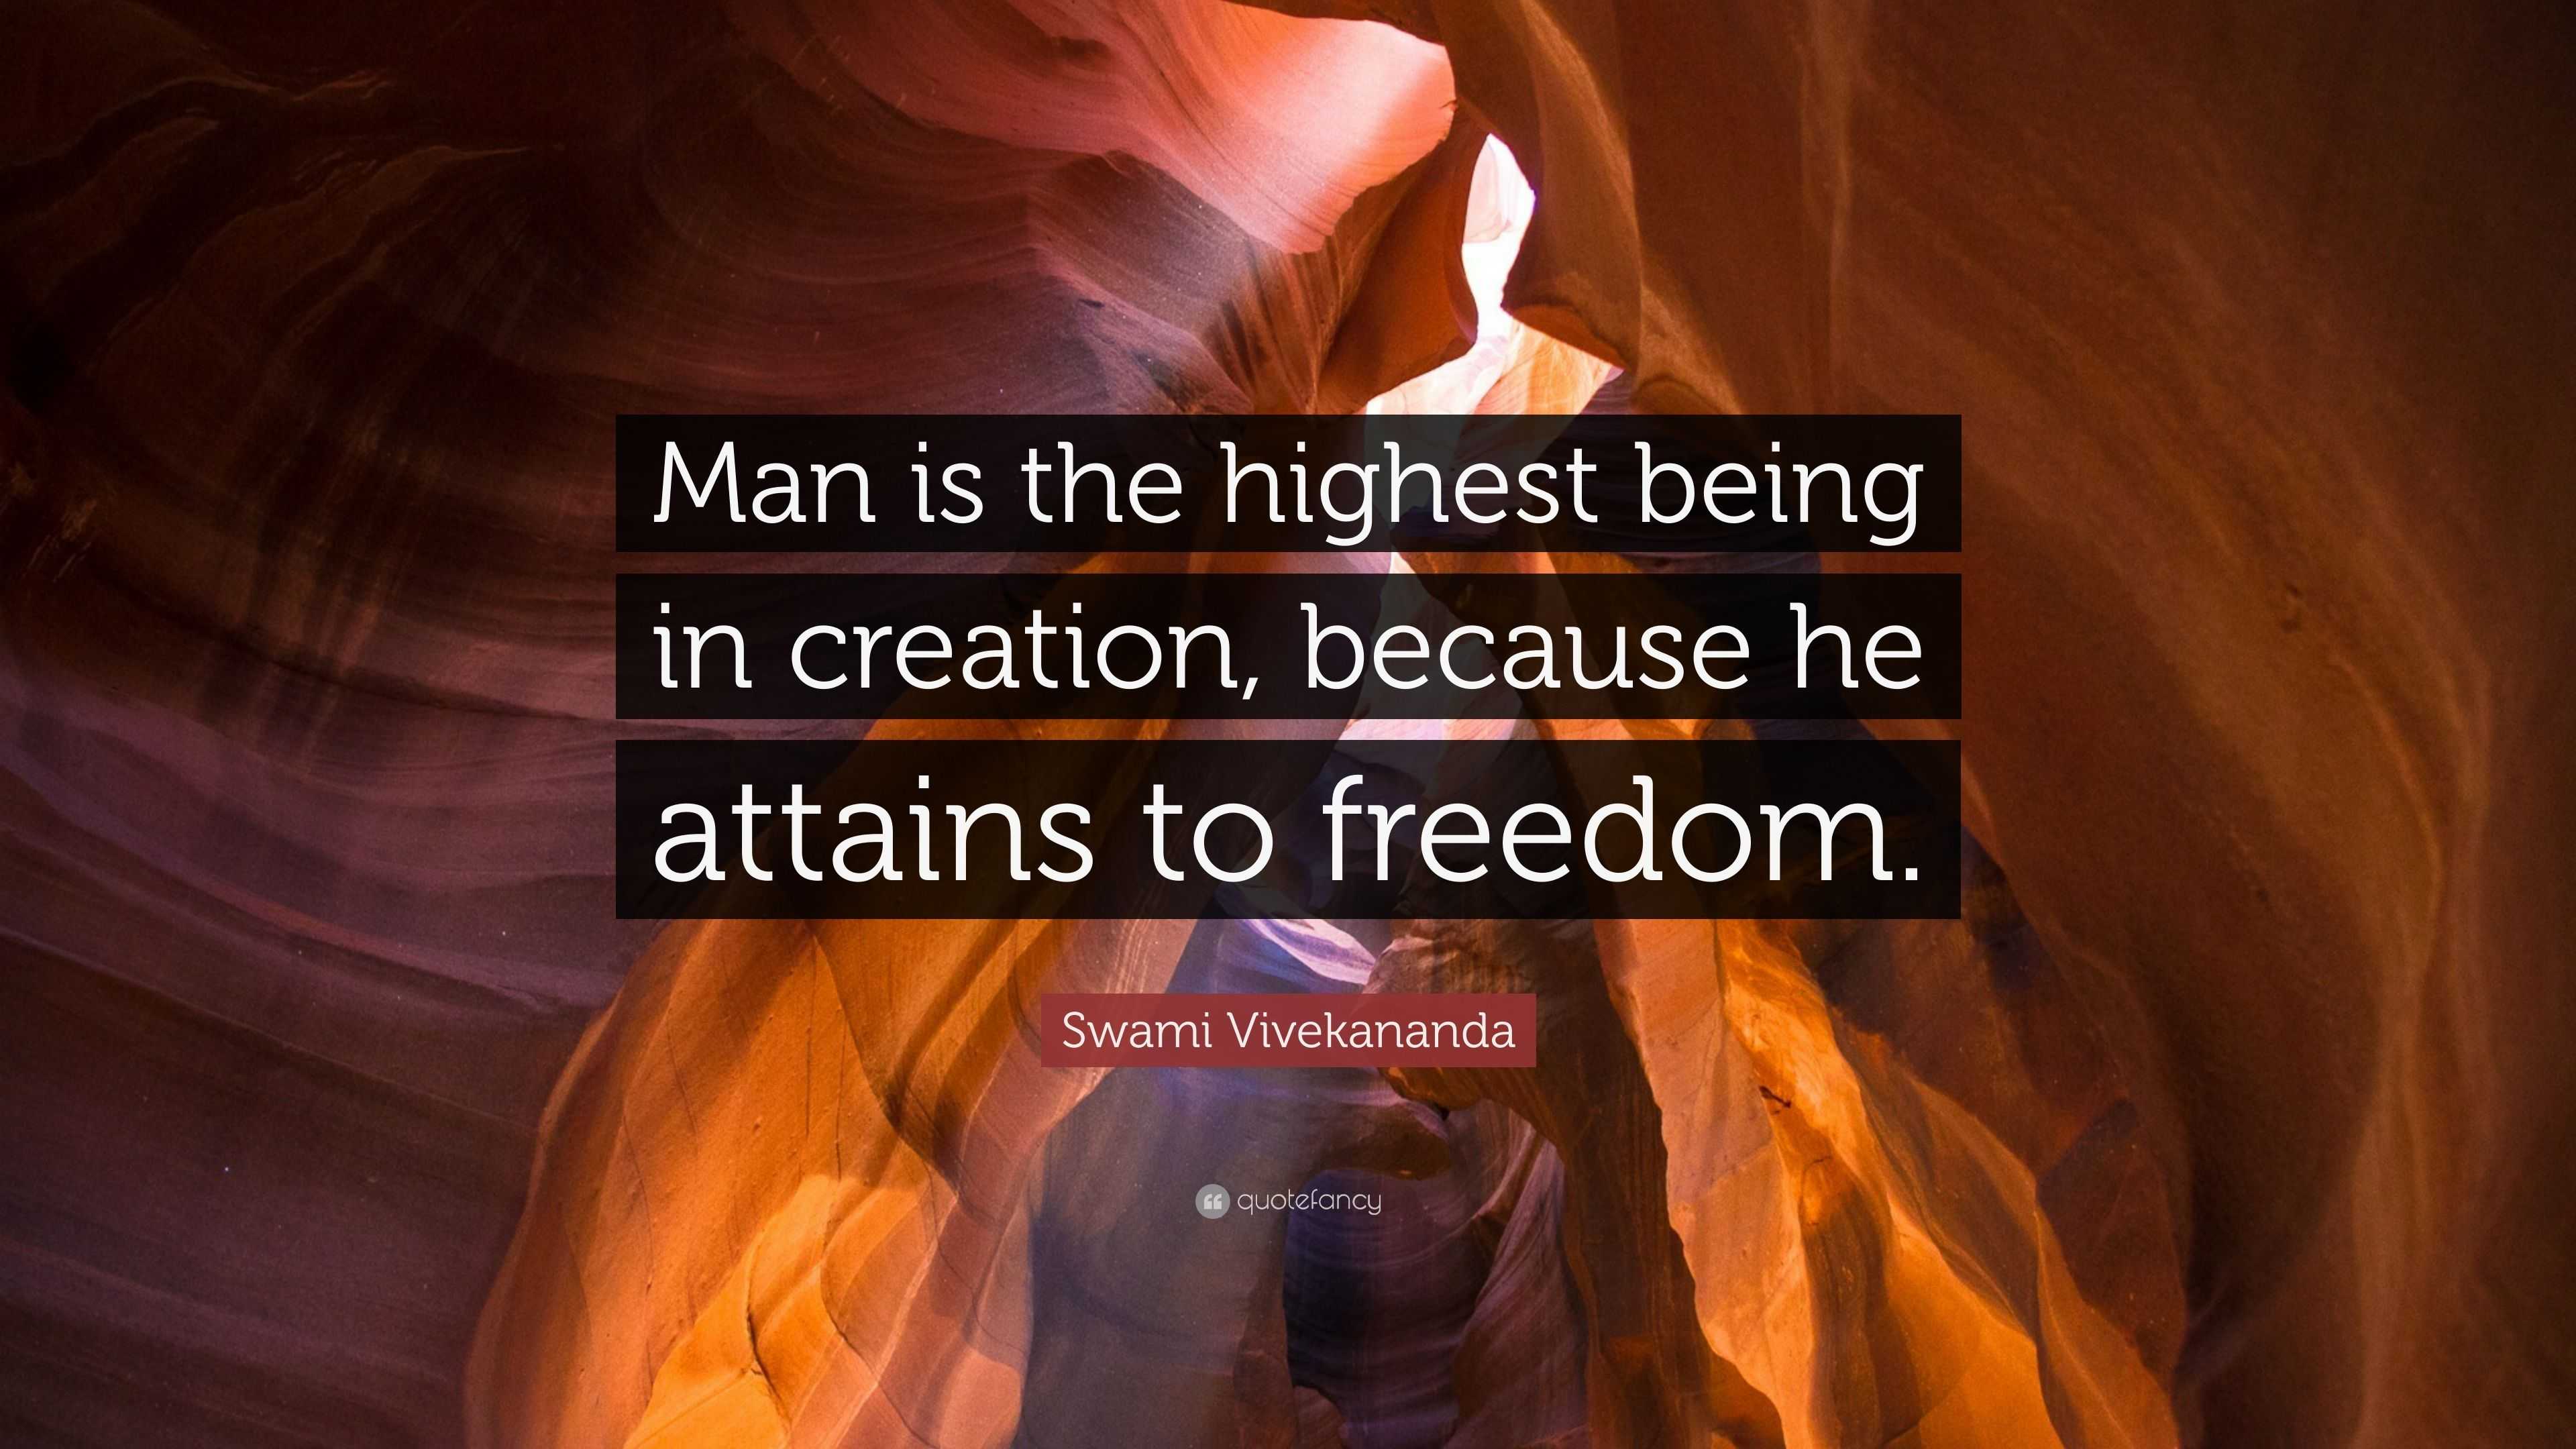 Swami Vivekananda Quote: “Man is the highest being in creation, because ...